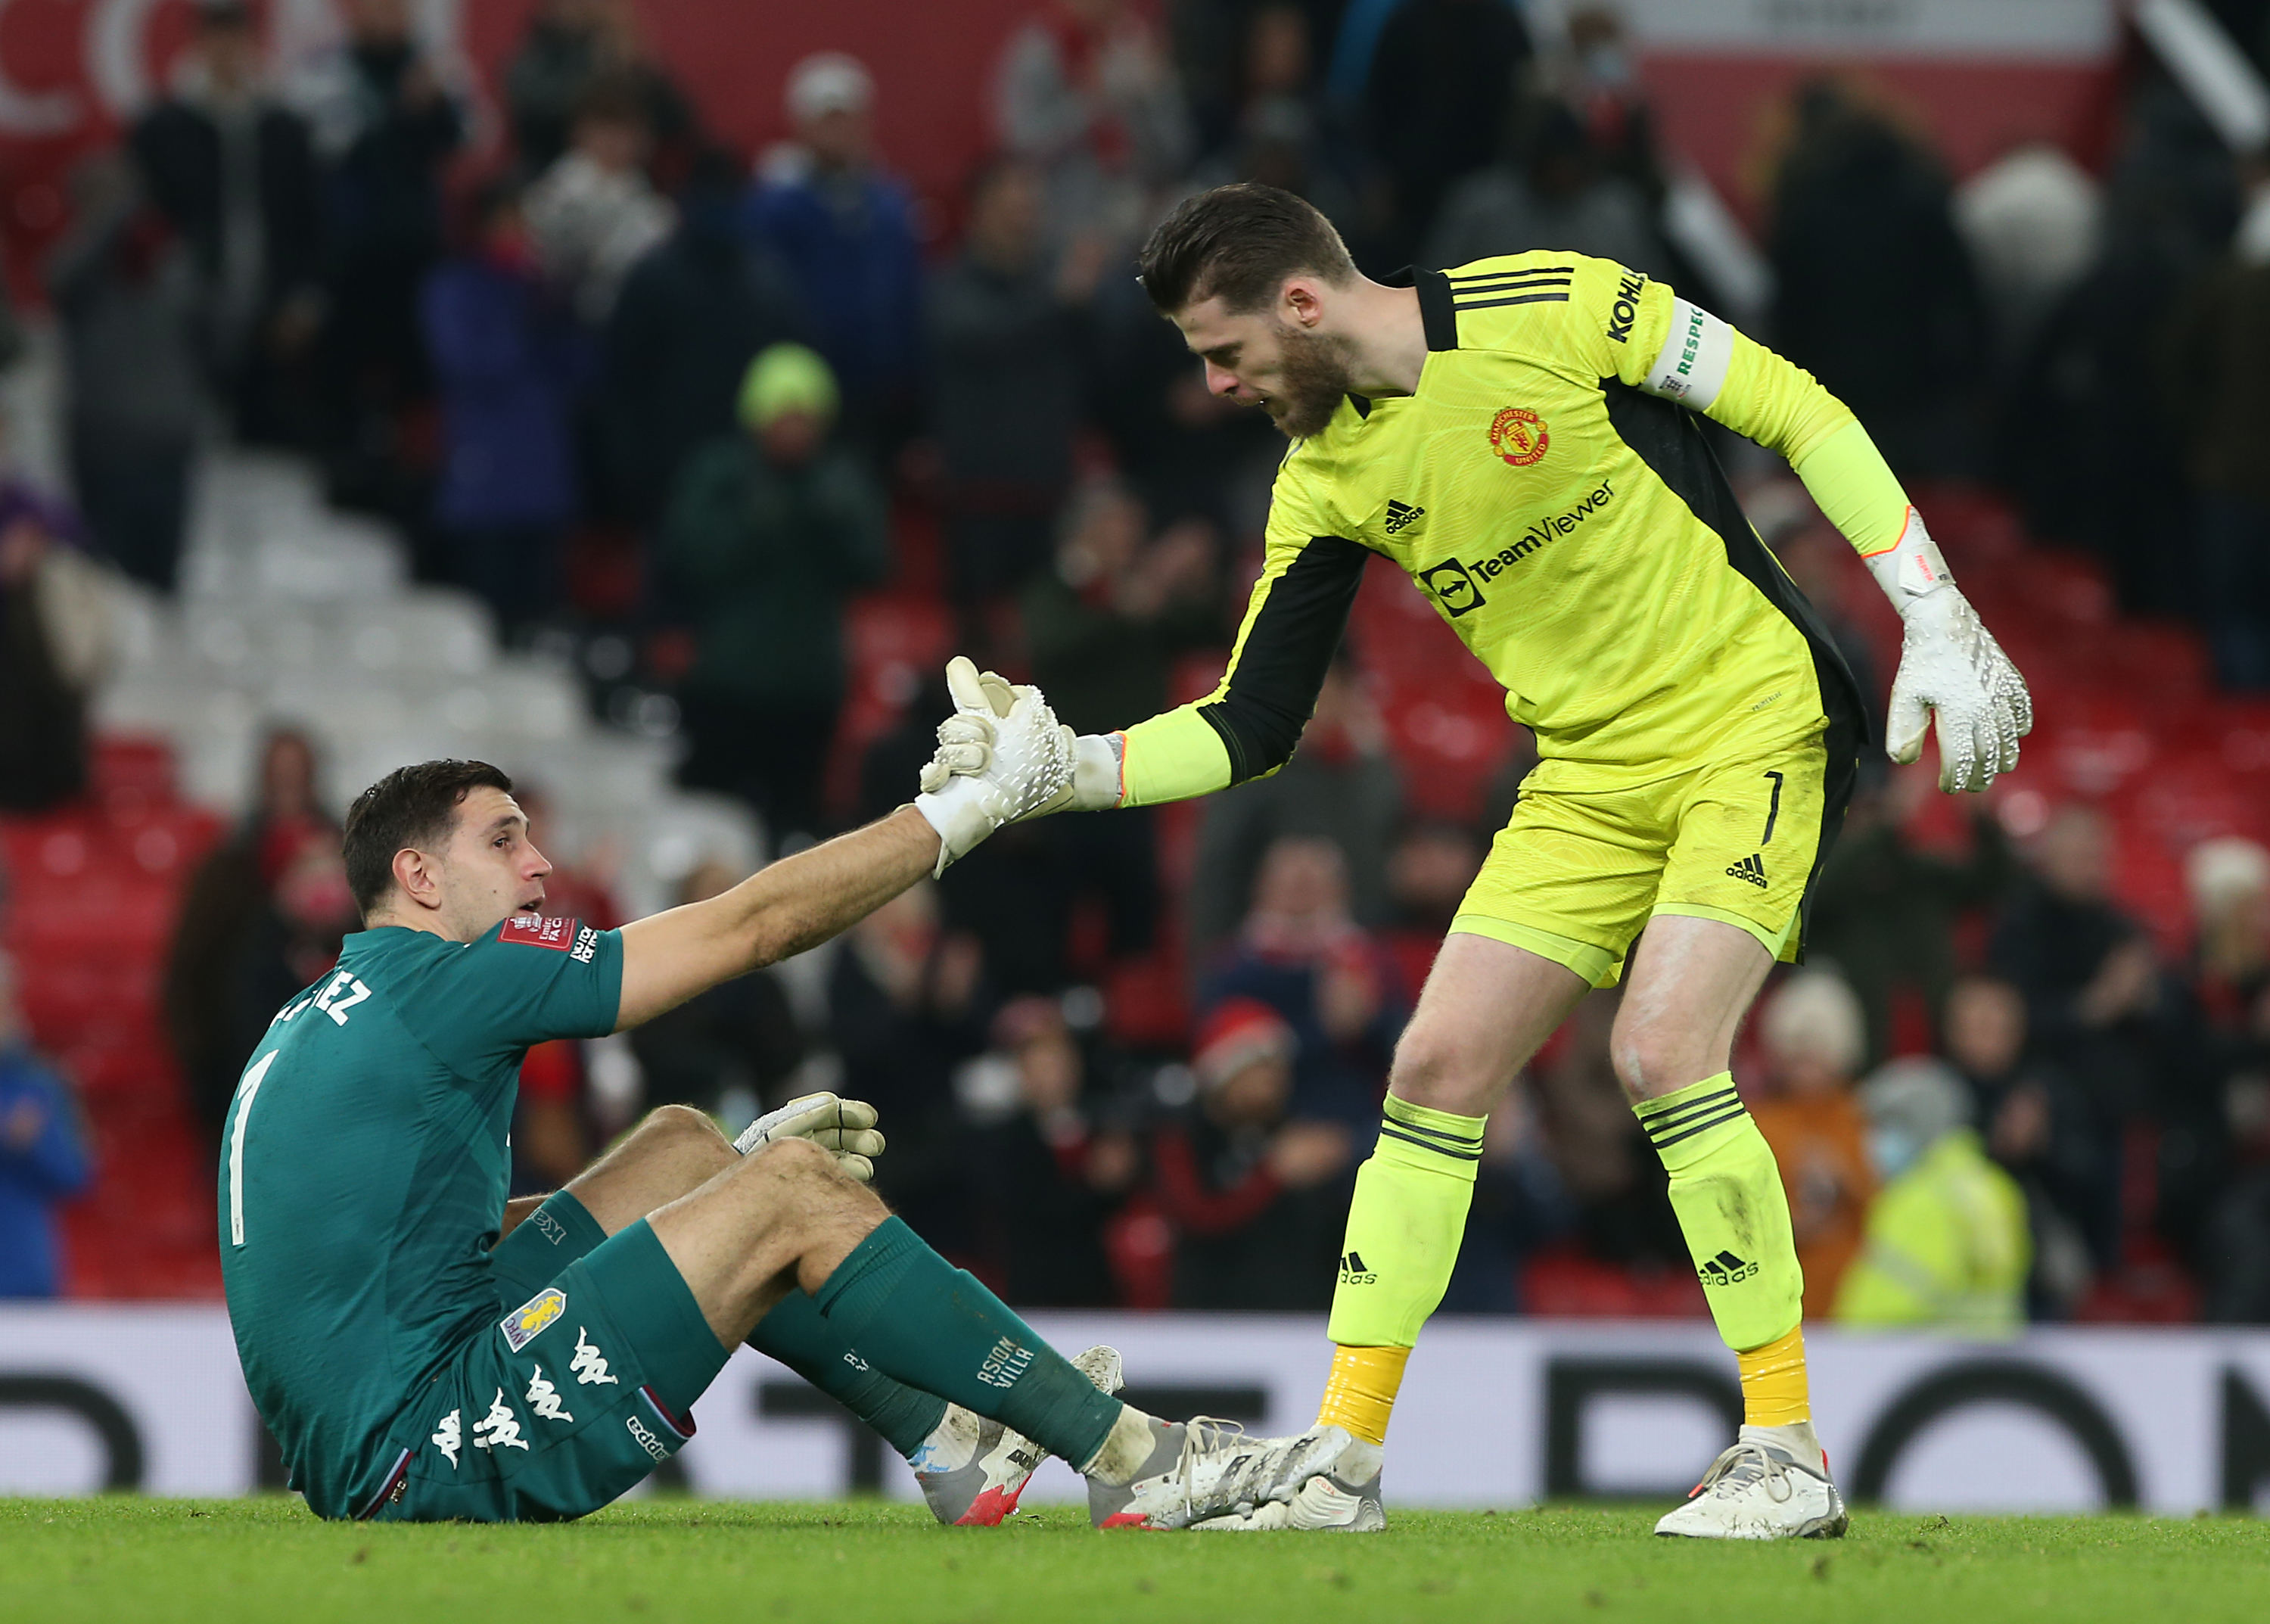 ‘Outstanding for me’ – Ralf Rangnick singles out Man Utd star David de Gea after FA Cup win